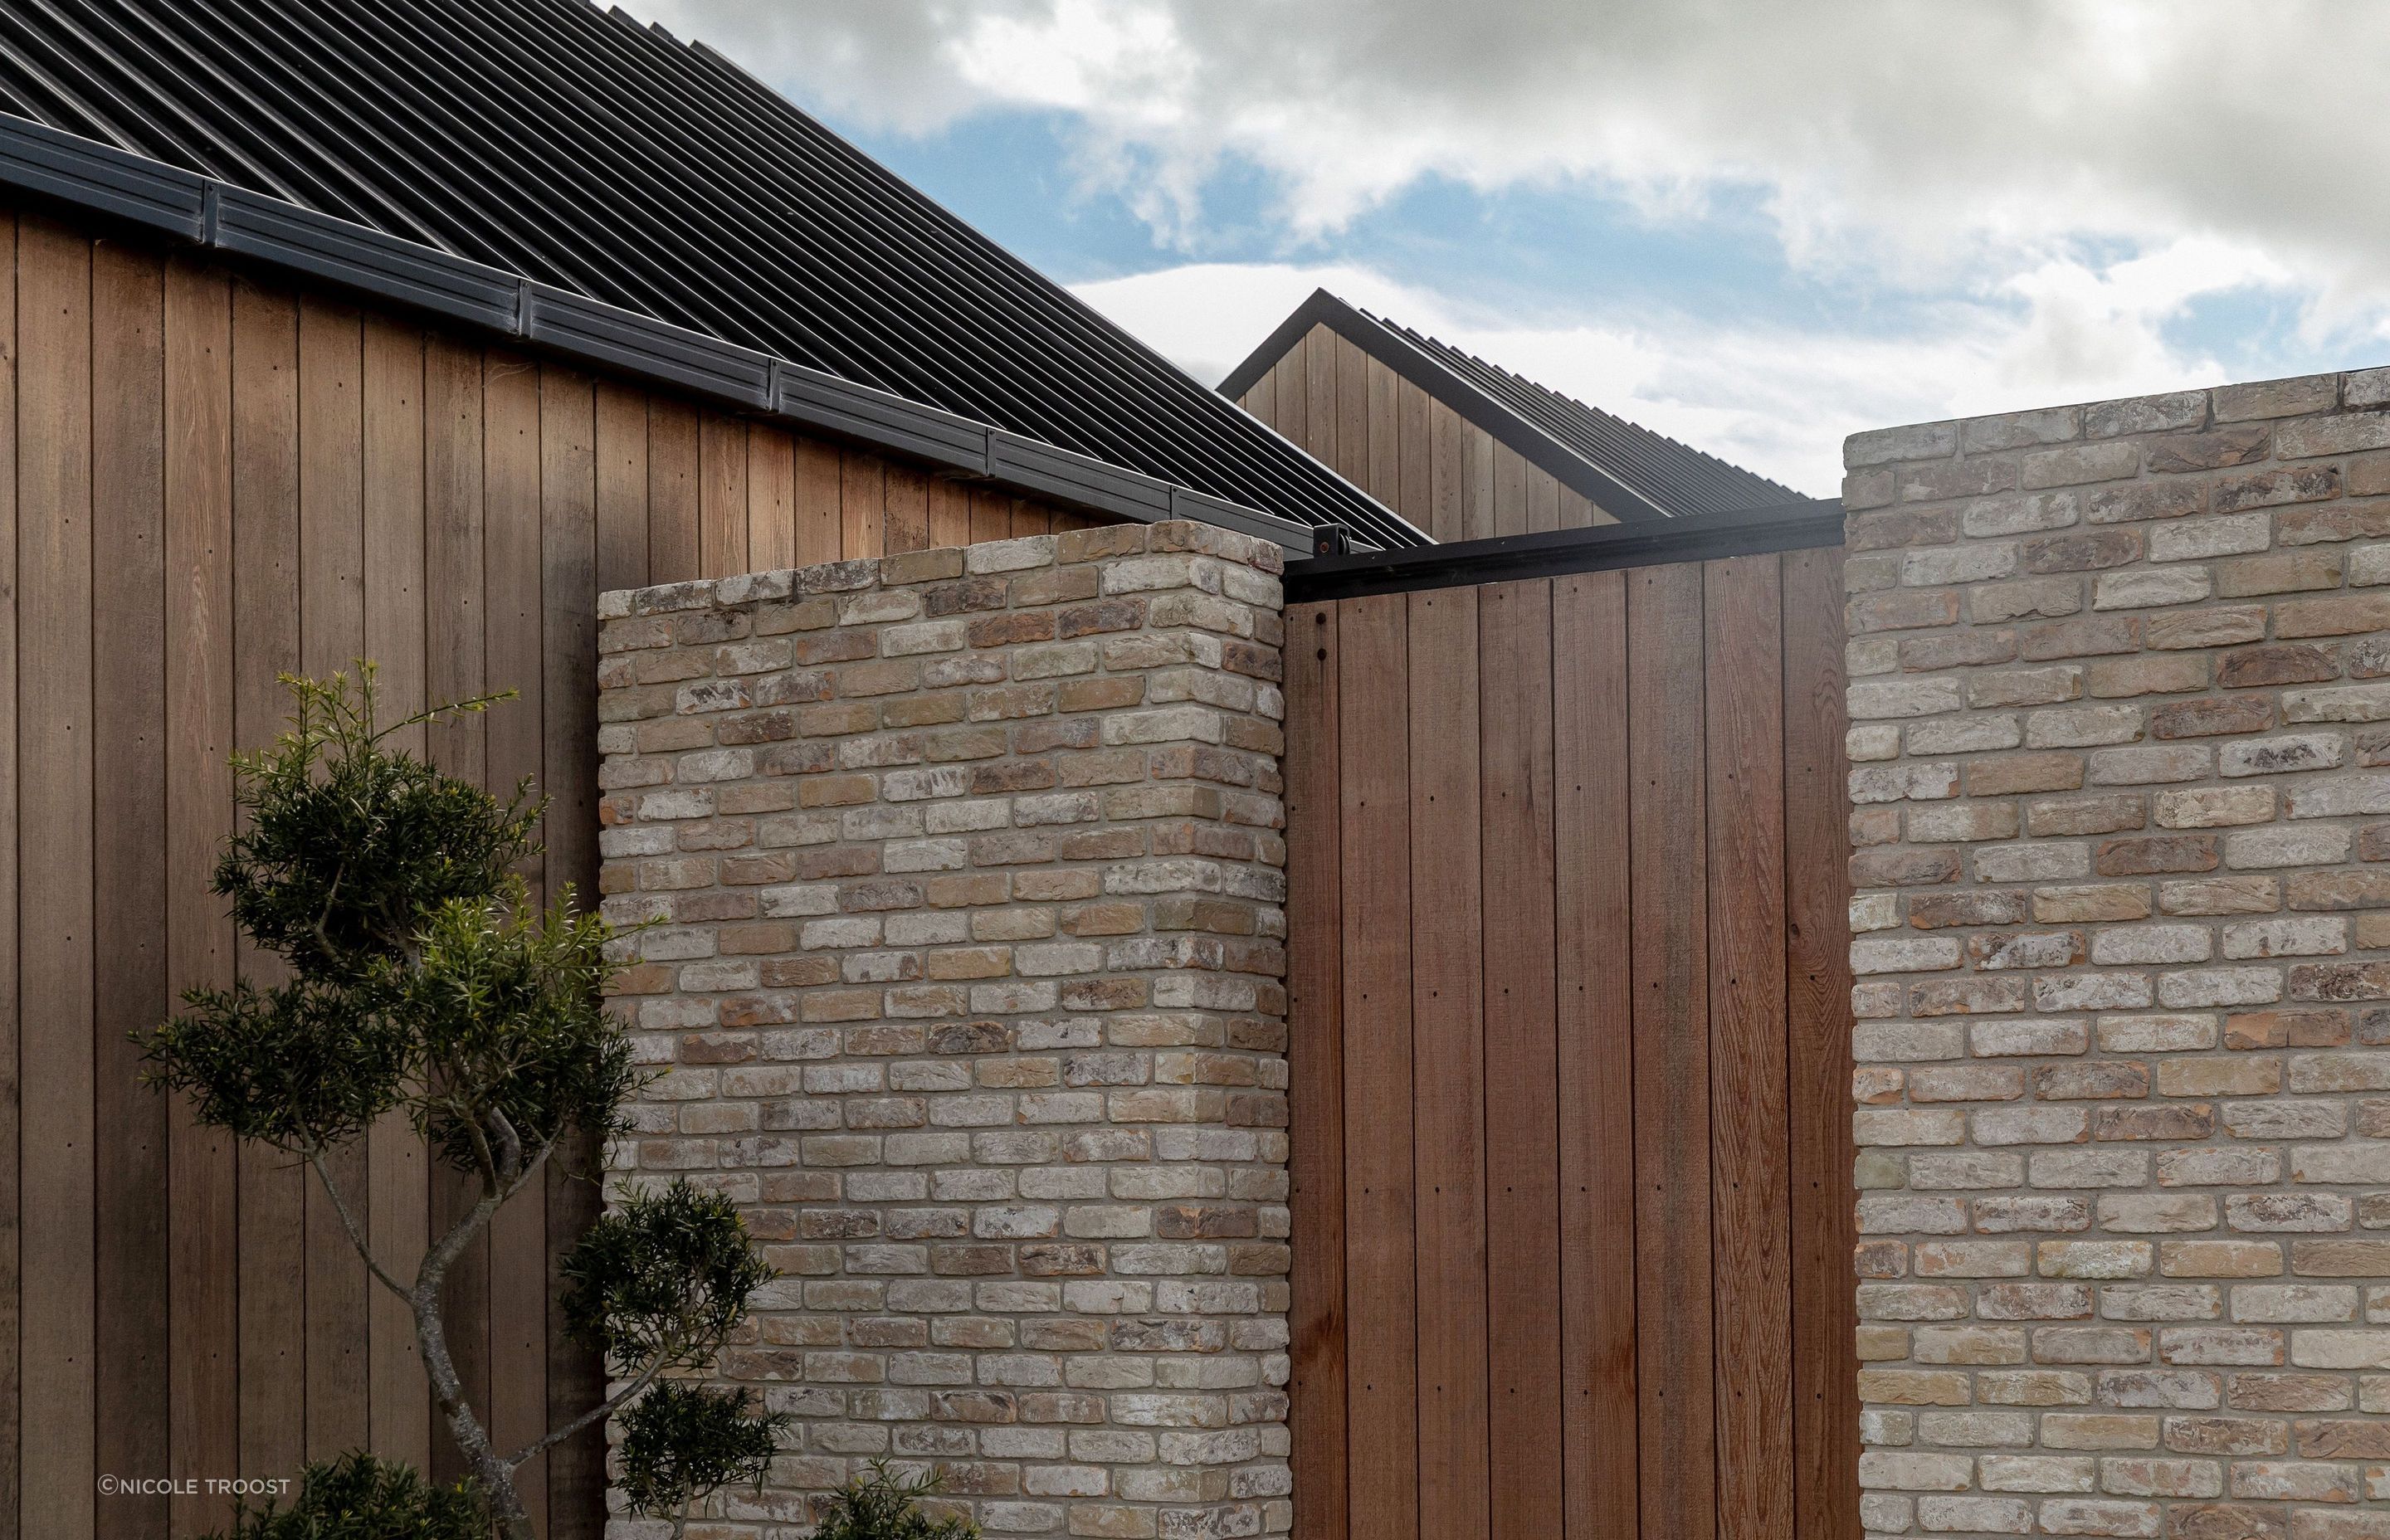 The juxtaposition of cedar, black steel and pale brick forms a rich exterior materiality.